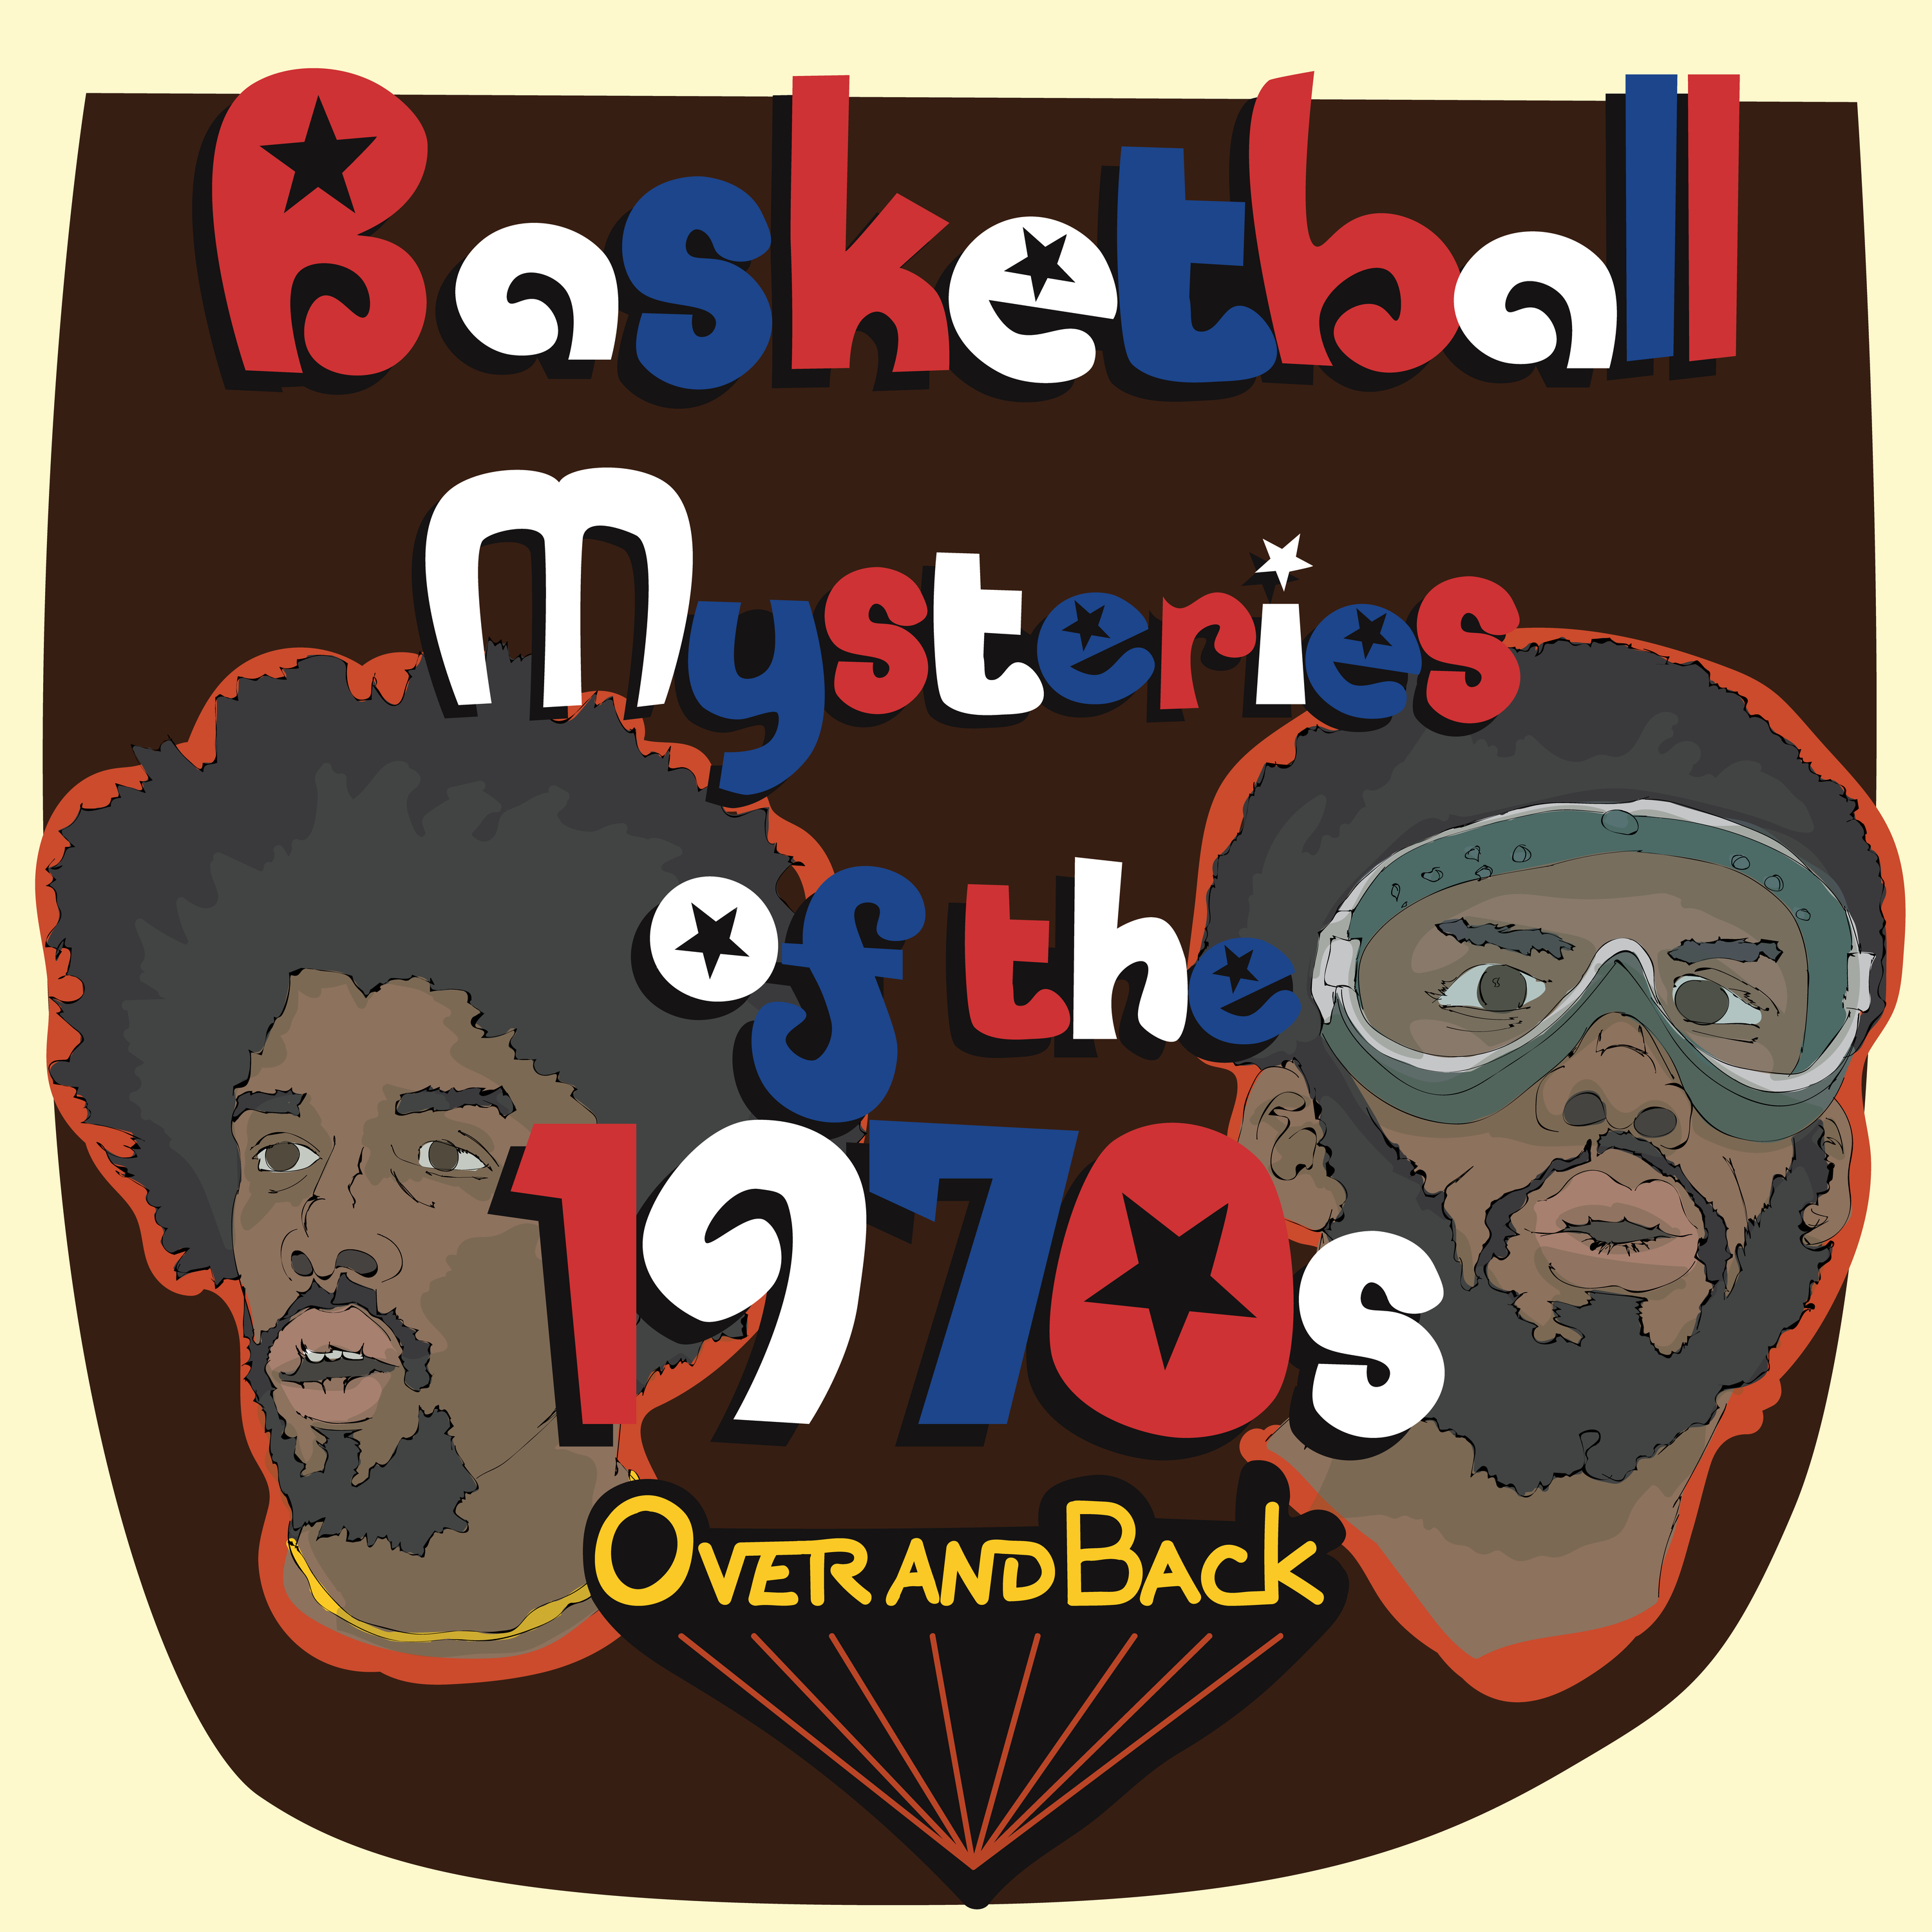 Who launched the three-pointer? (Basketball Mysteries of the 1970s #5)